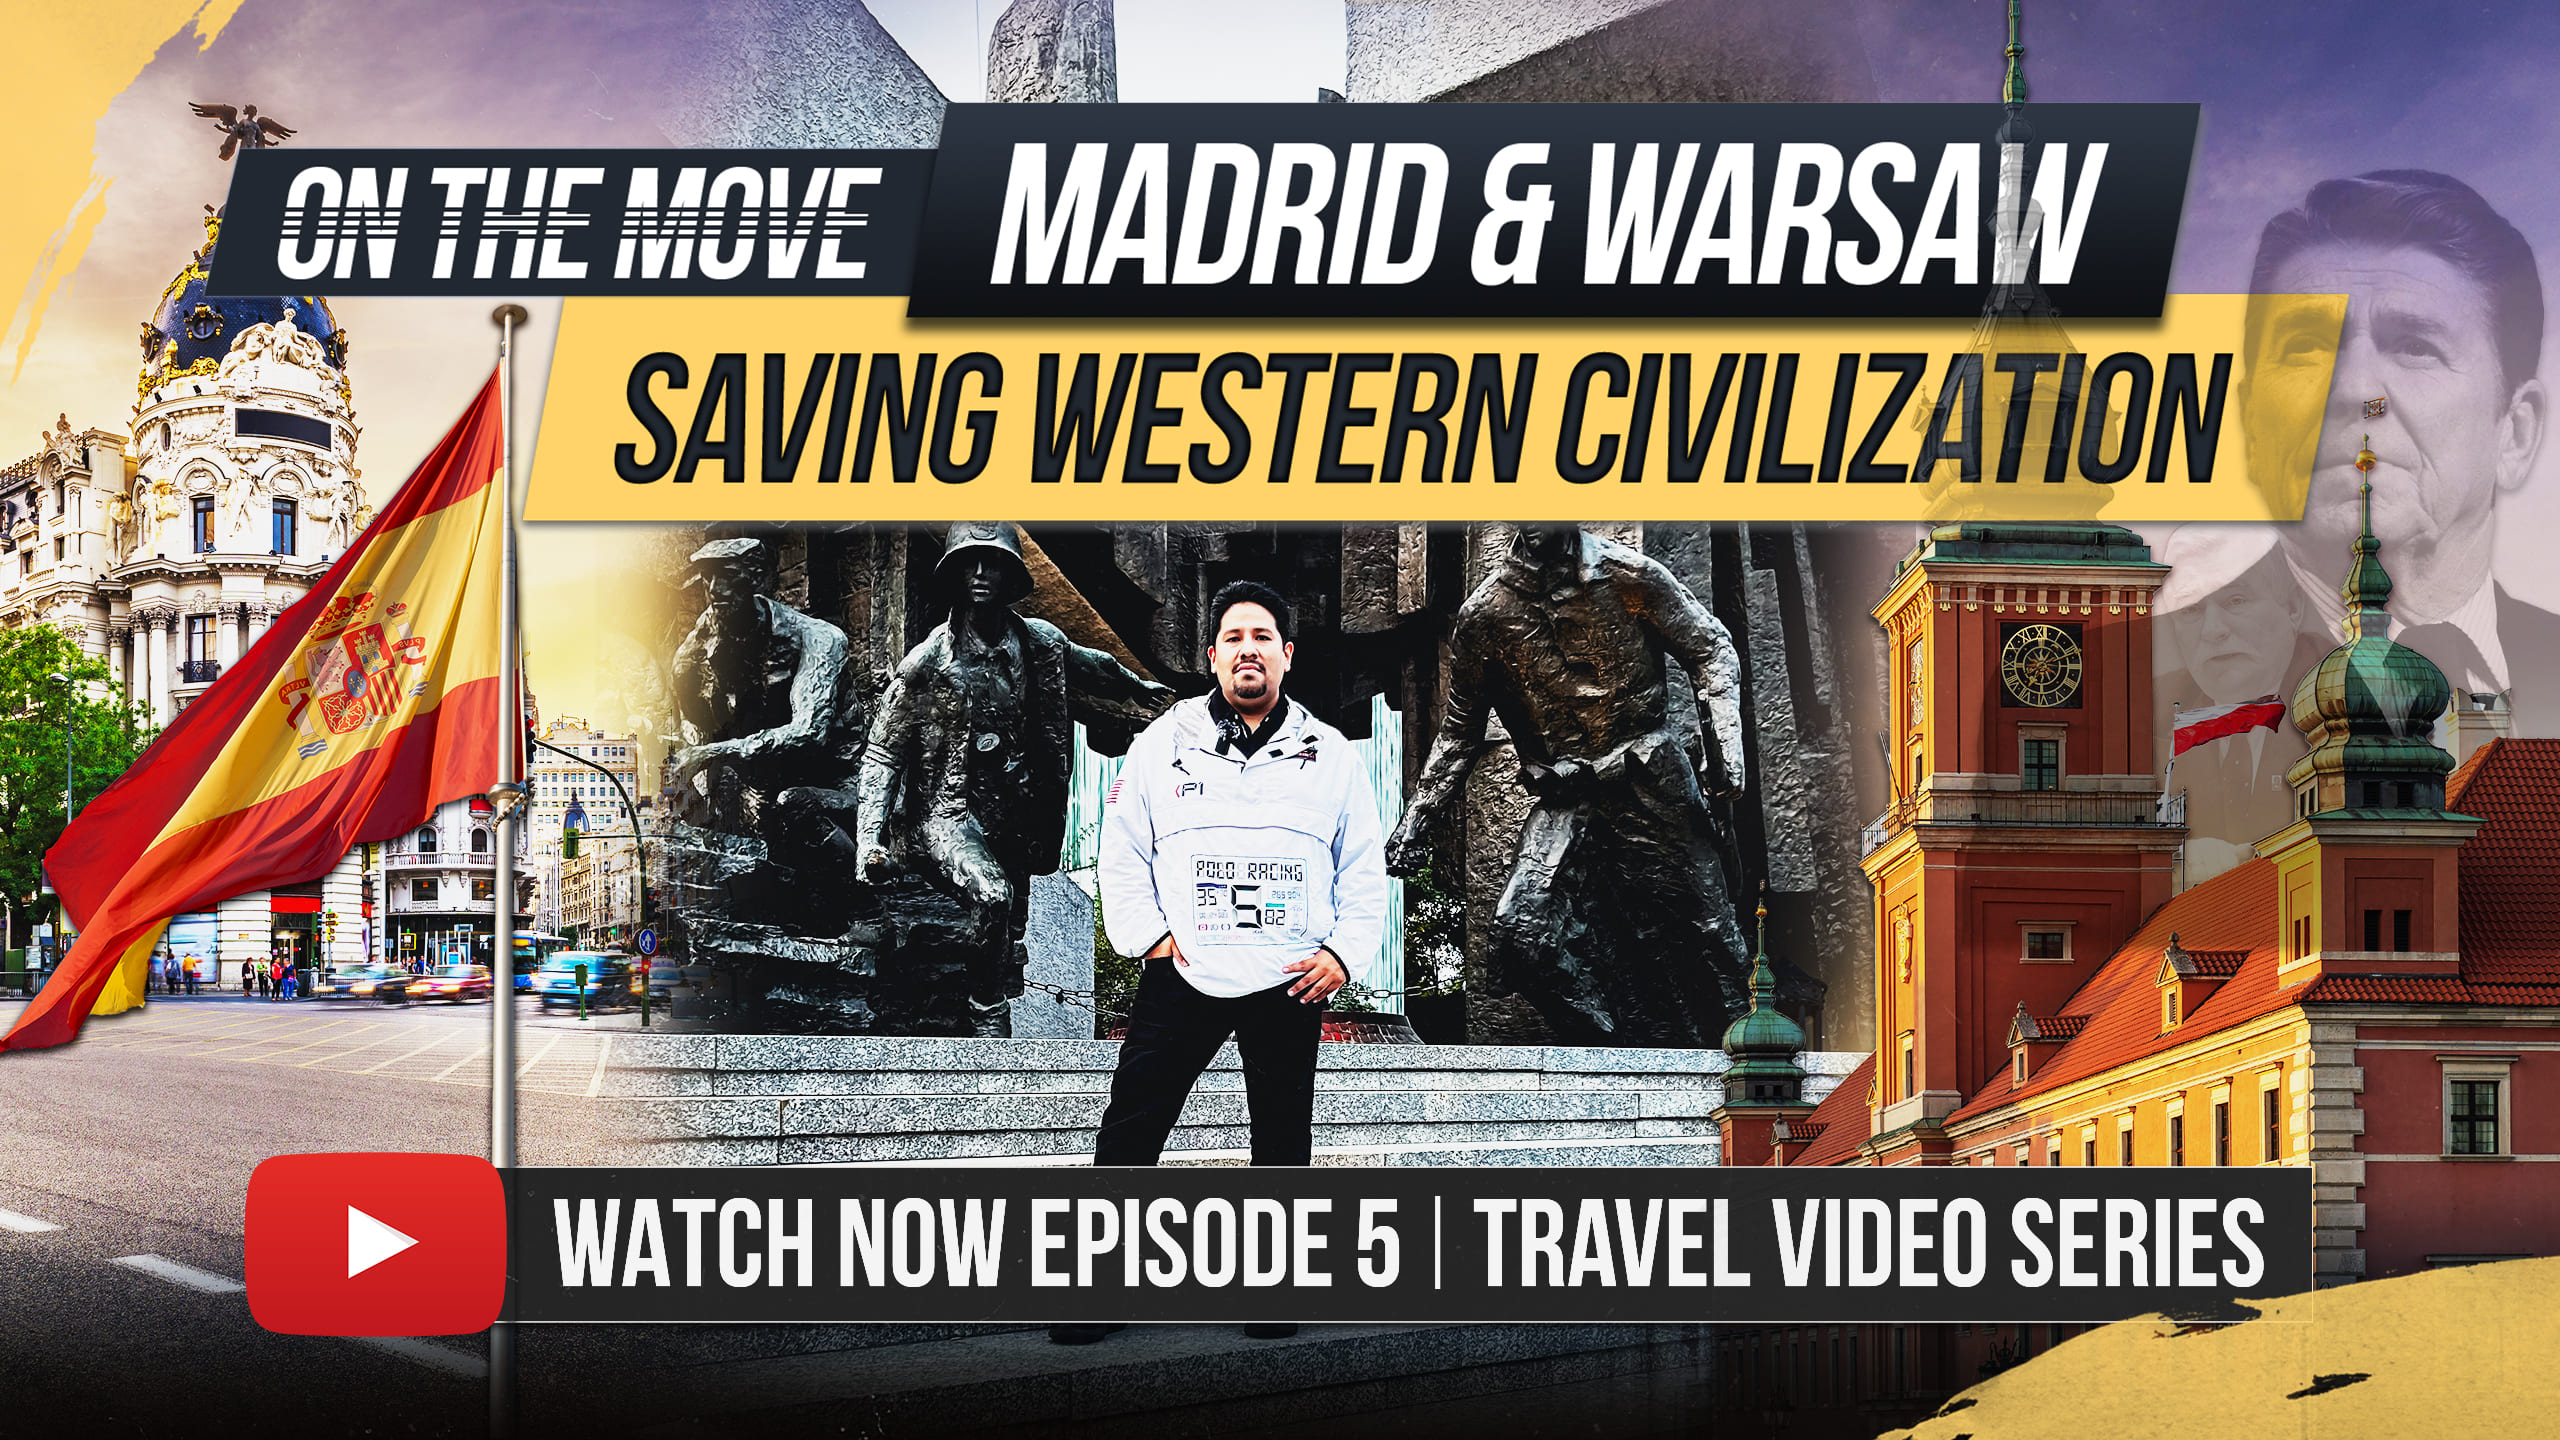 Saving Spain and Western Civilization | OTM in Madrid and Warsaw